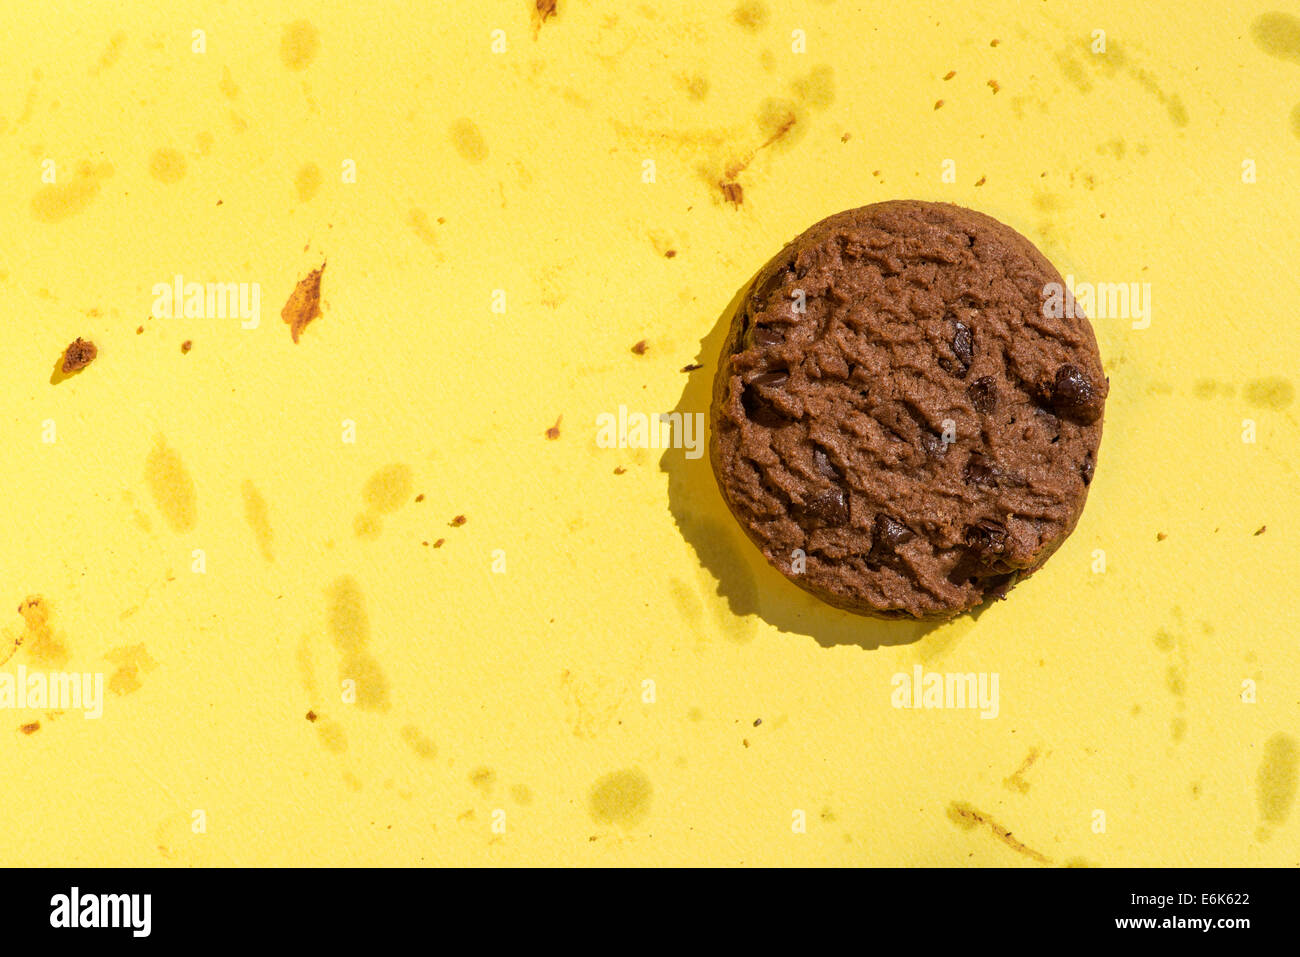 Biscuits on yellow background. Day light Stock Photo